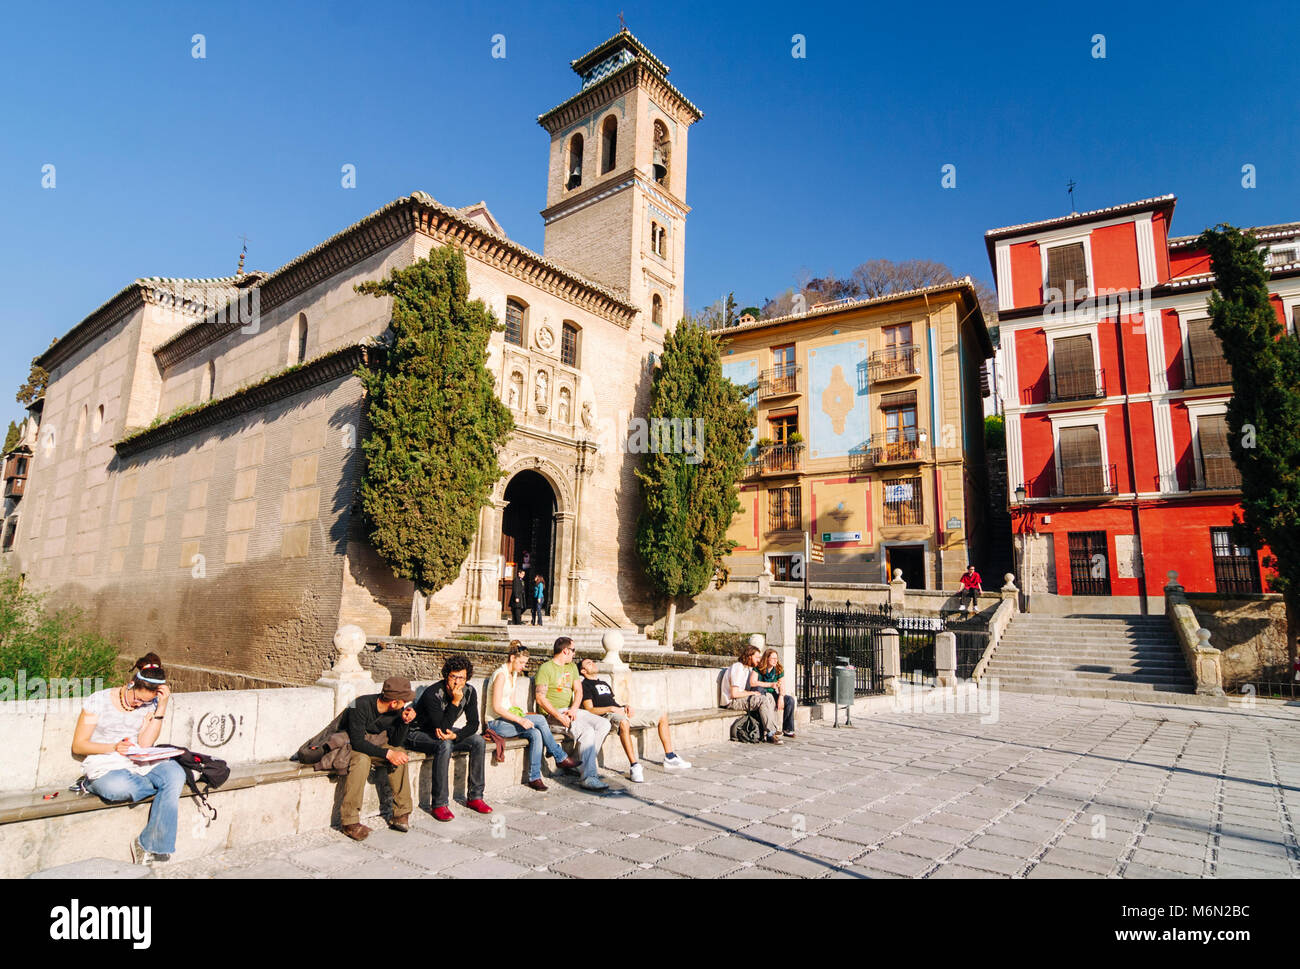 Granada, Andalusia, Spain. Tourists and young locals alike sit by the Santa Ana church in Plaza Nueva sq. in the Unesco listed Albaicin district . Stock Photo